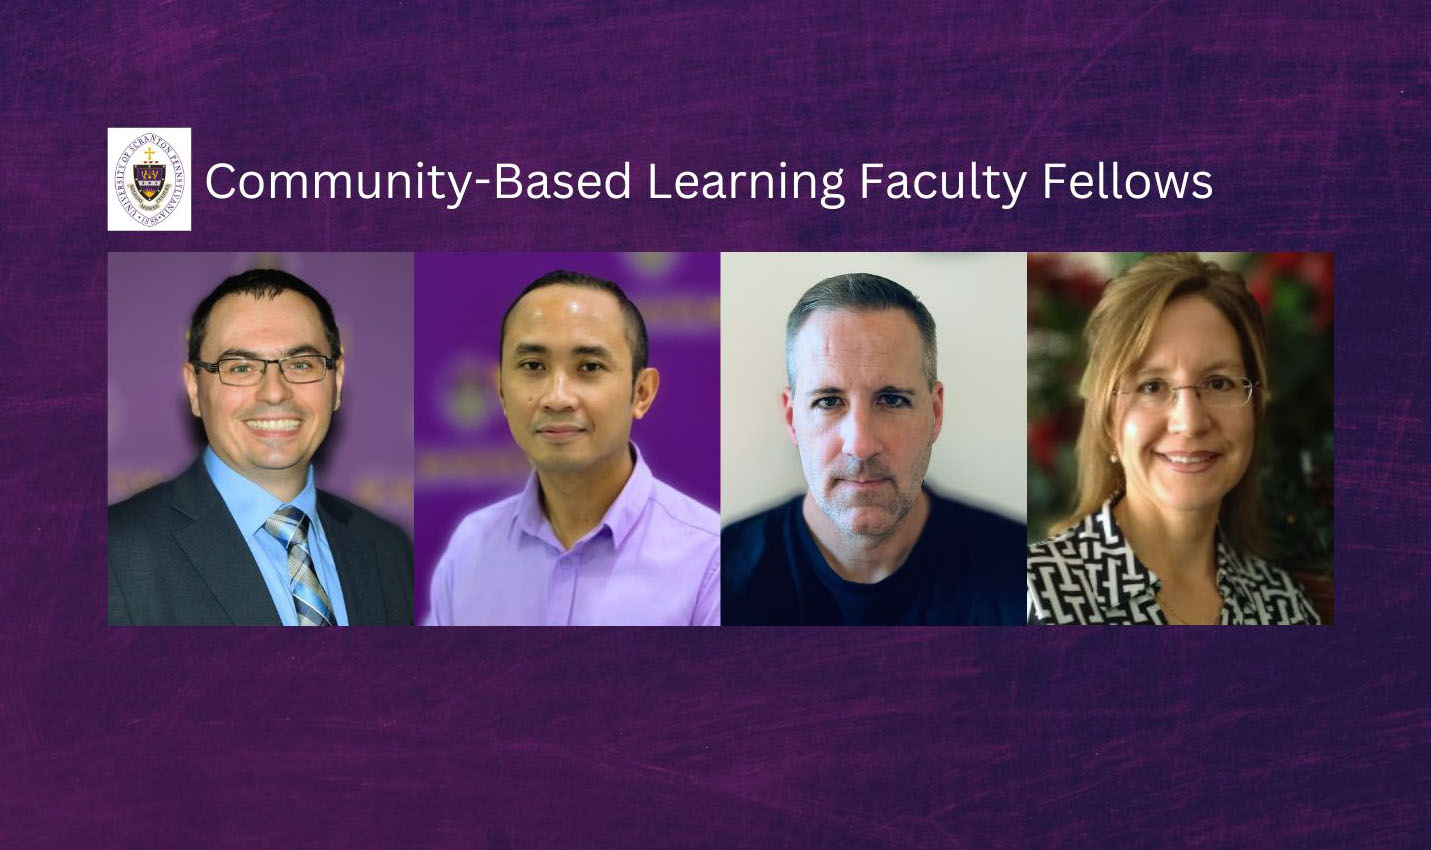 Image of four Community-Based Learning Faculty Fellows and University crest